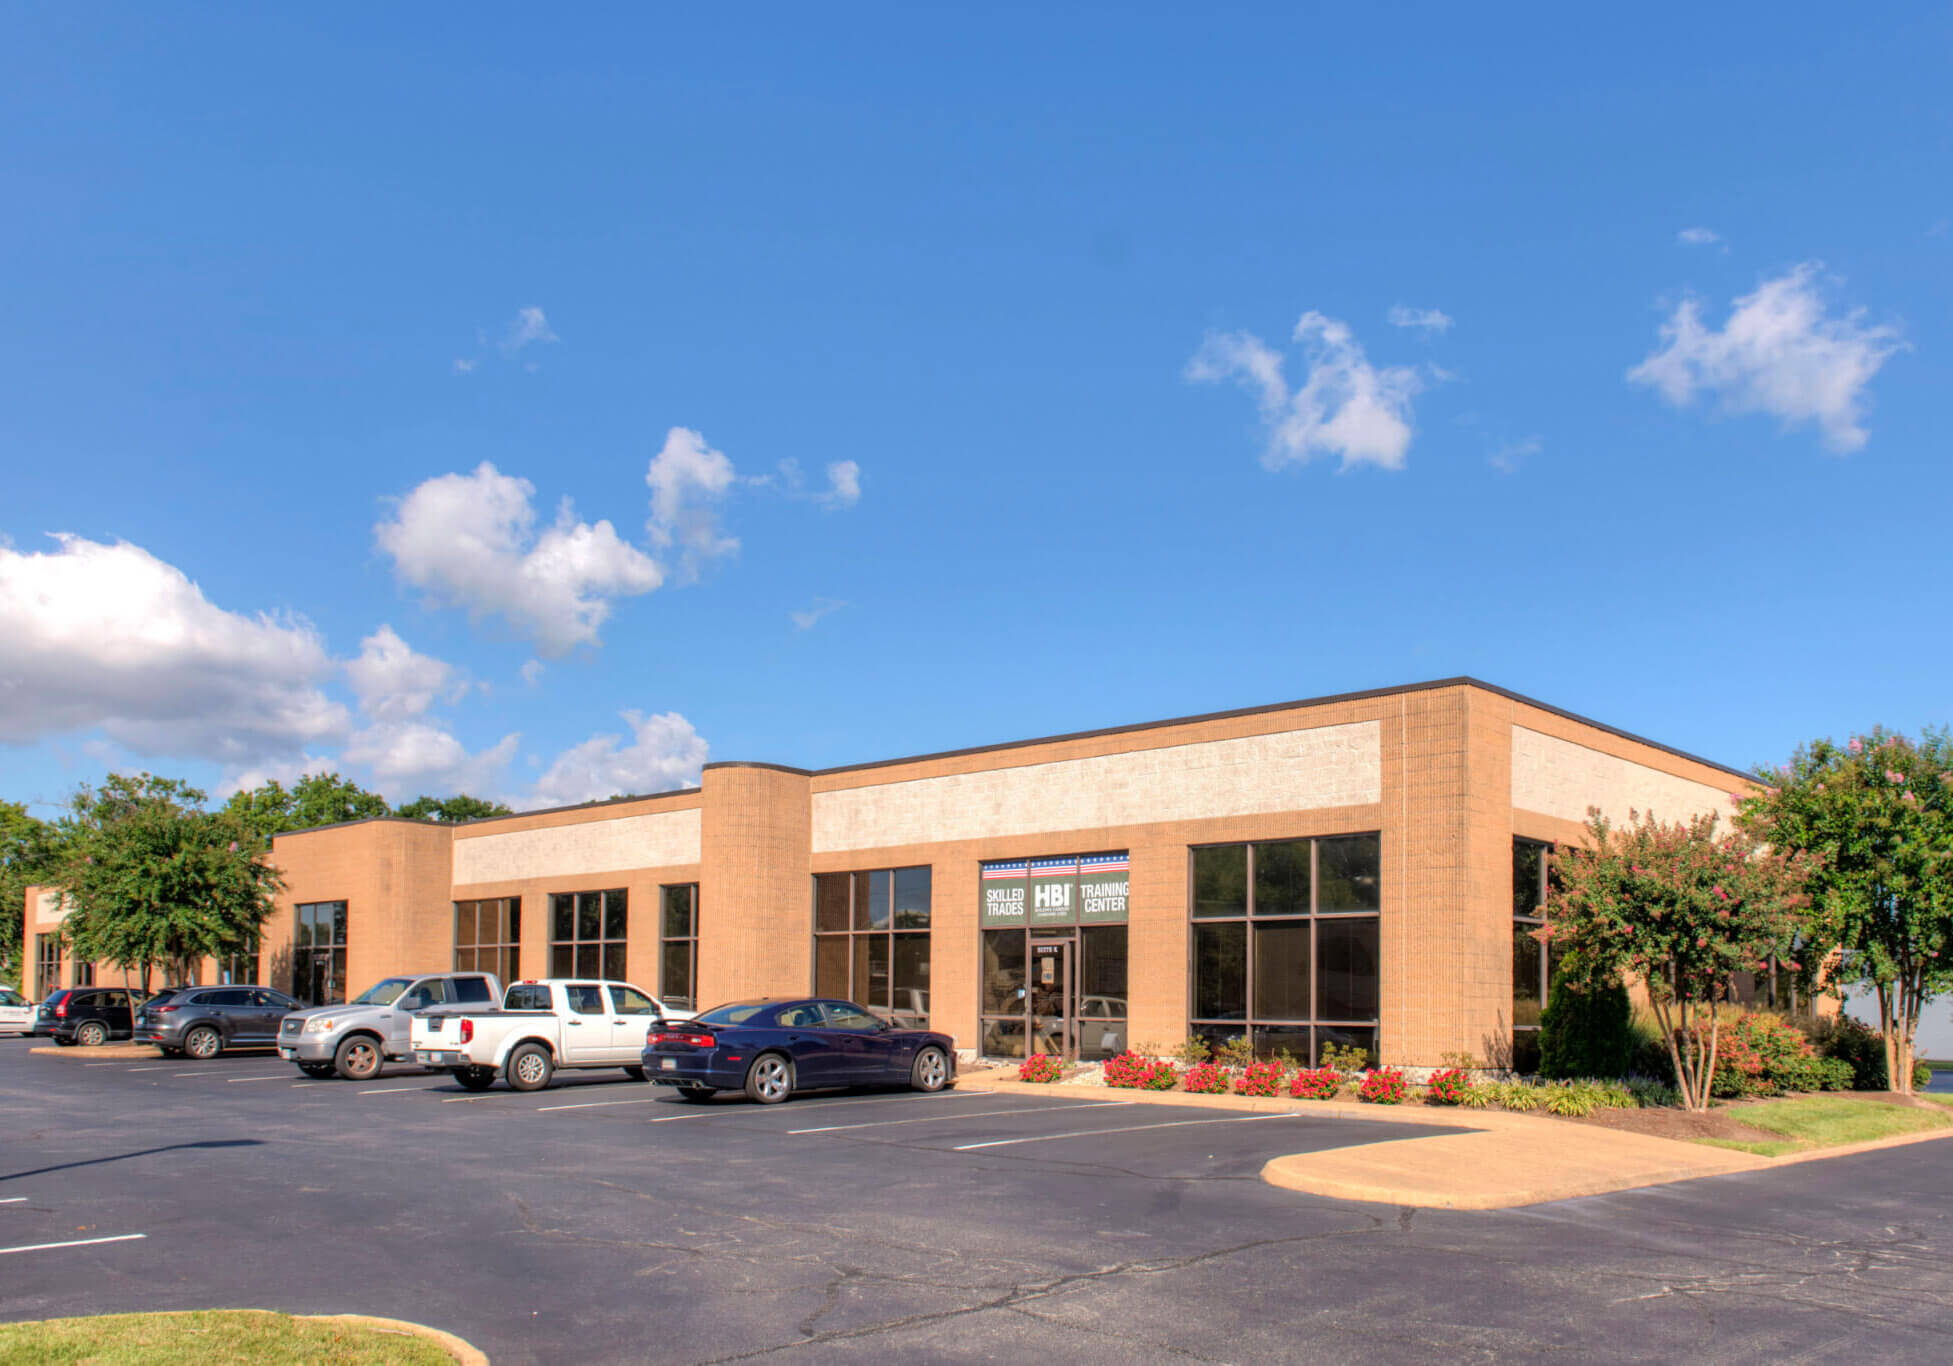 Commercial Real Estate photography for Colliers/ Norfolk by Roy Burroughs Photography, LLC